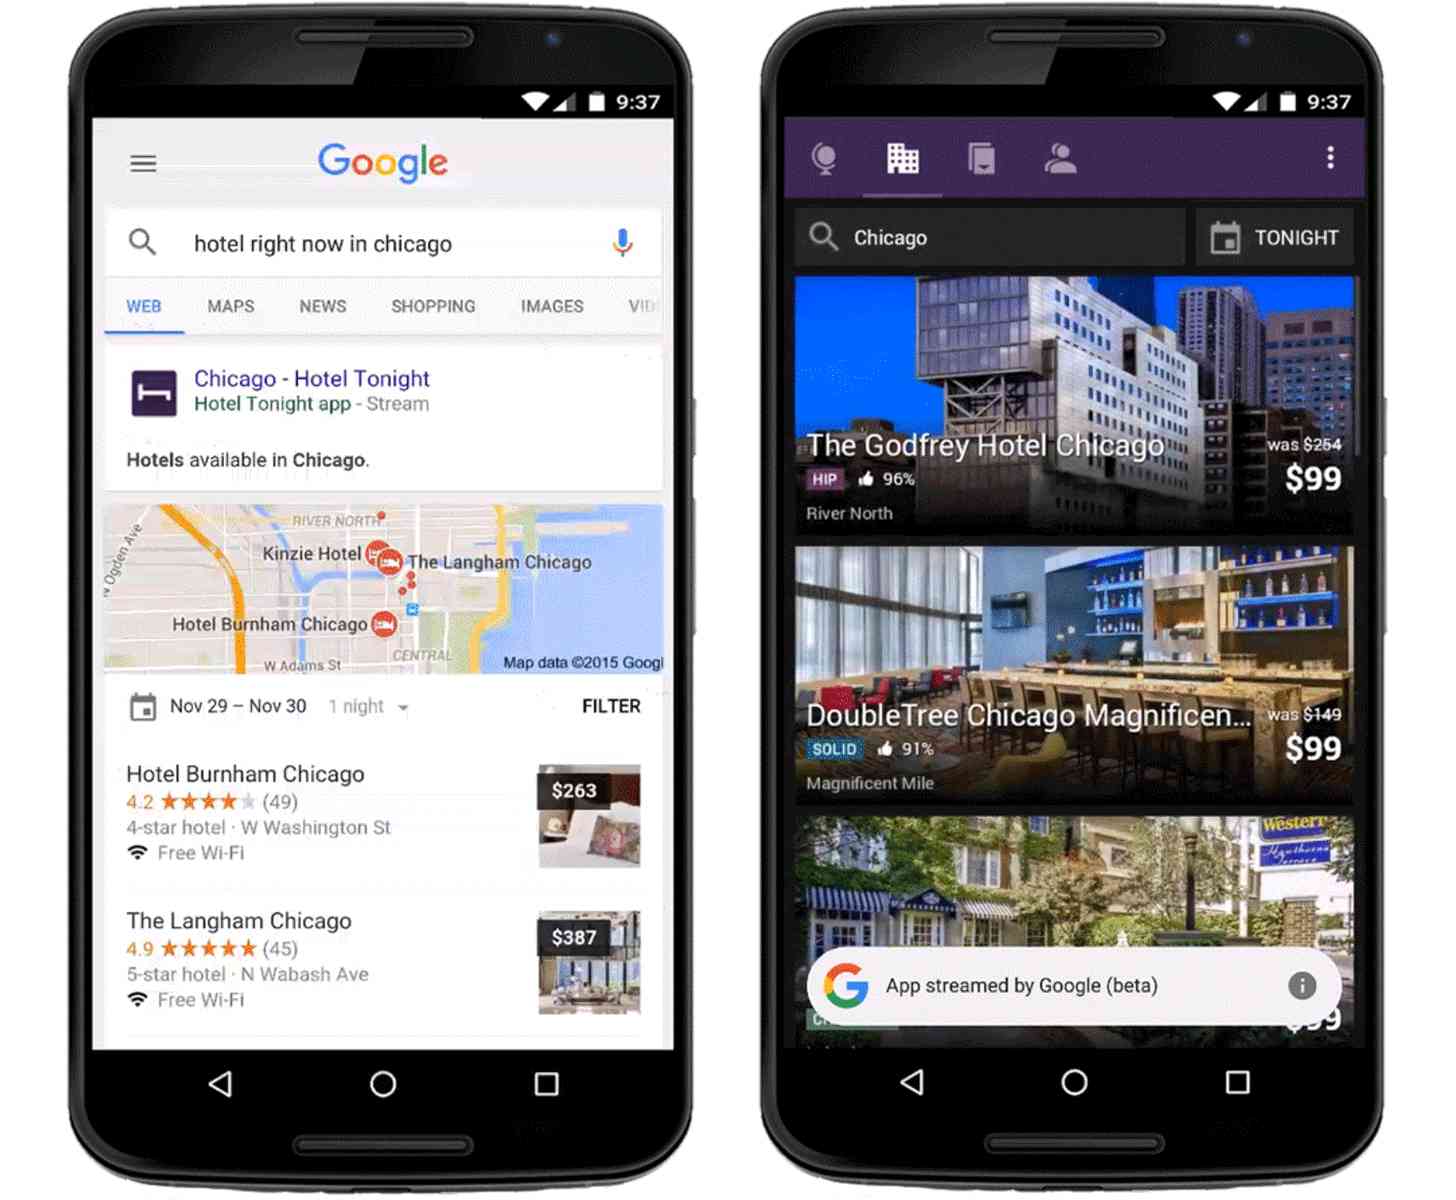 Google Search app-first, app streaming